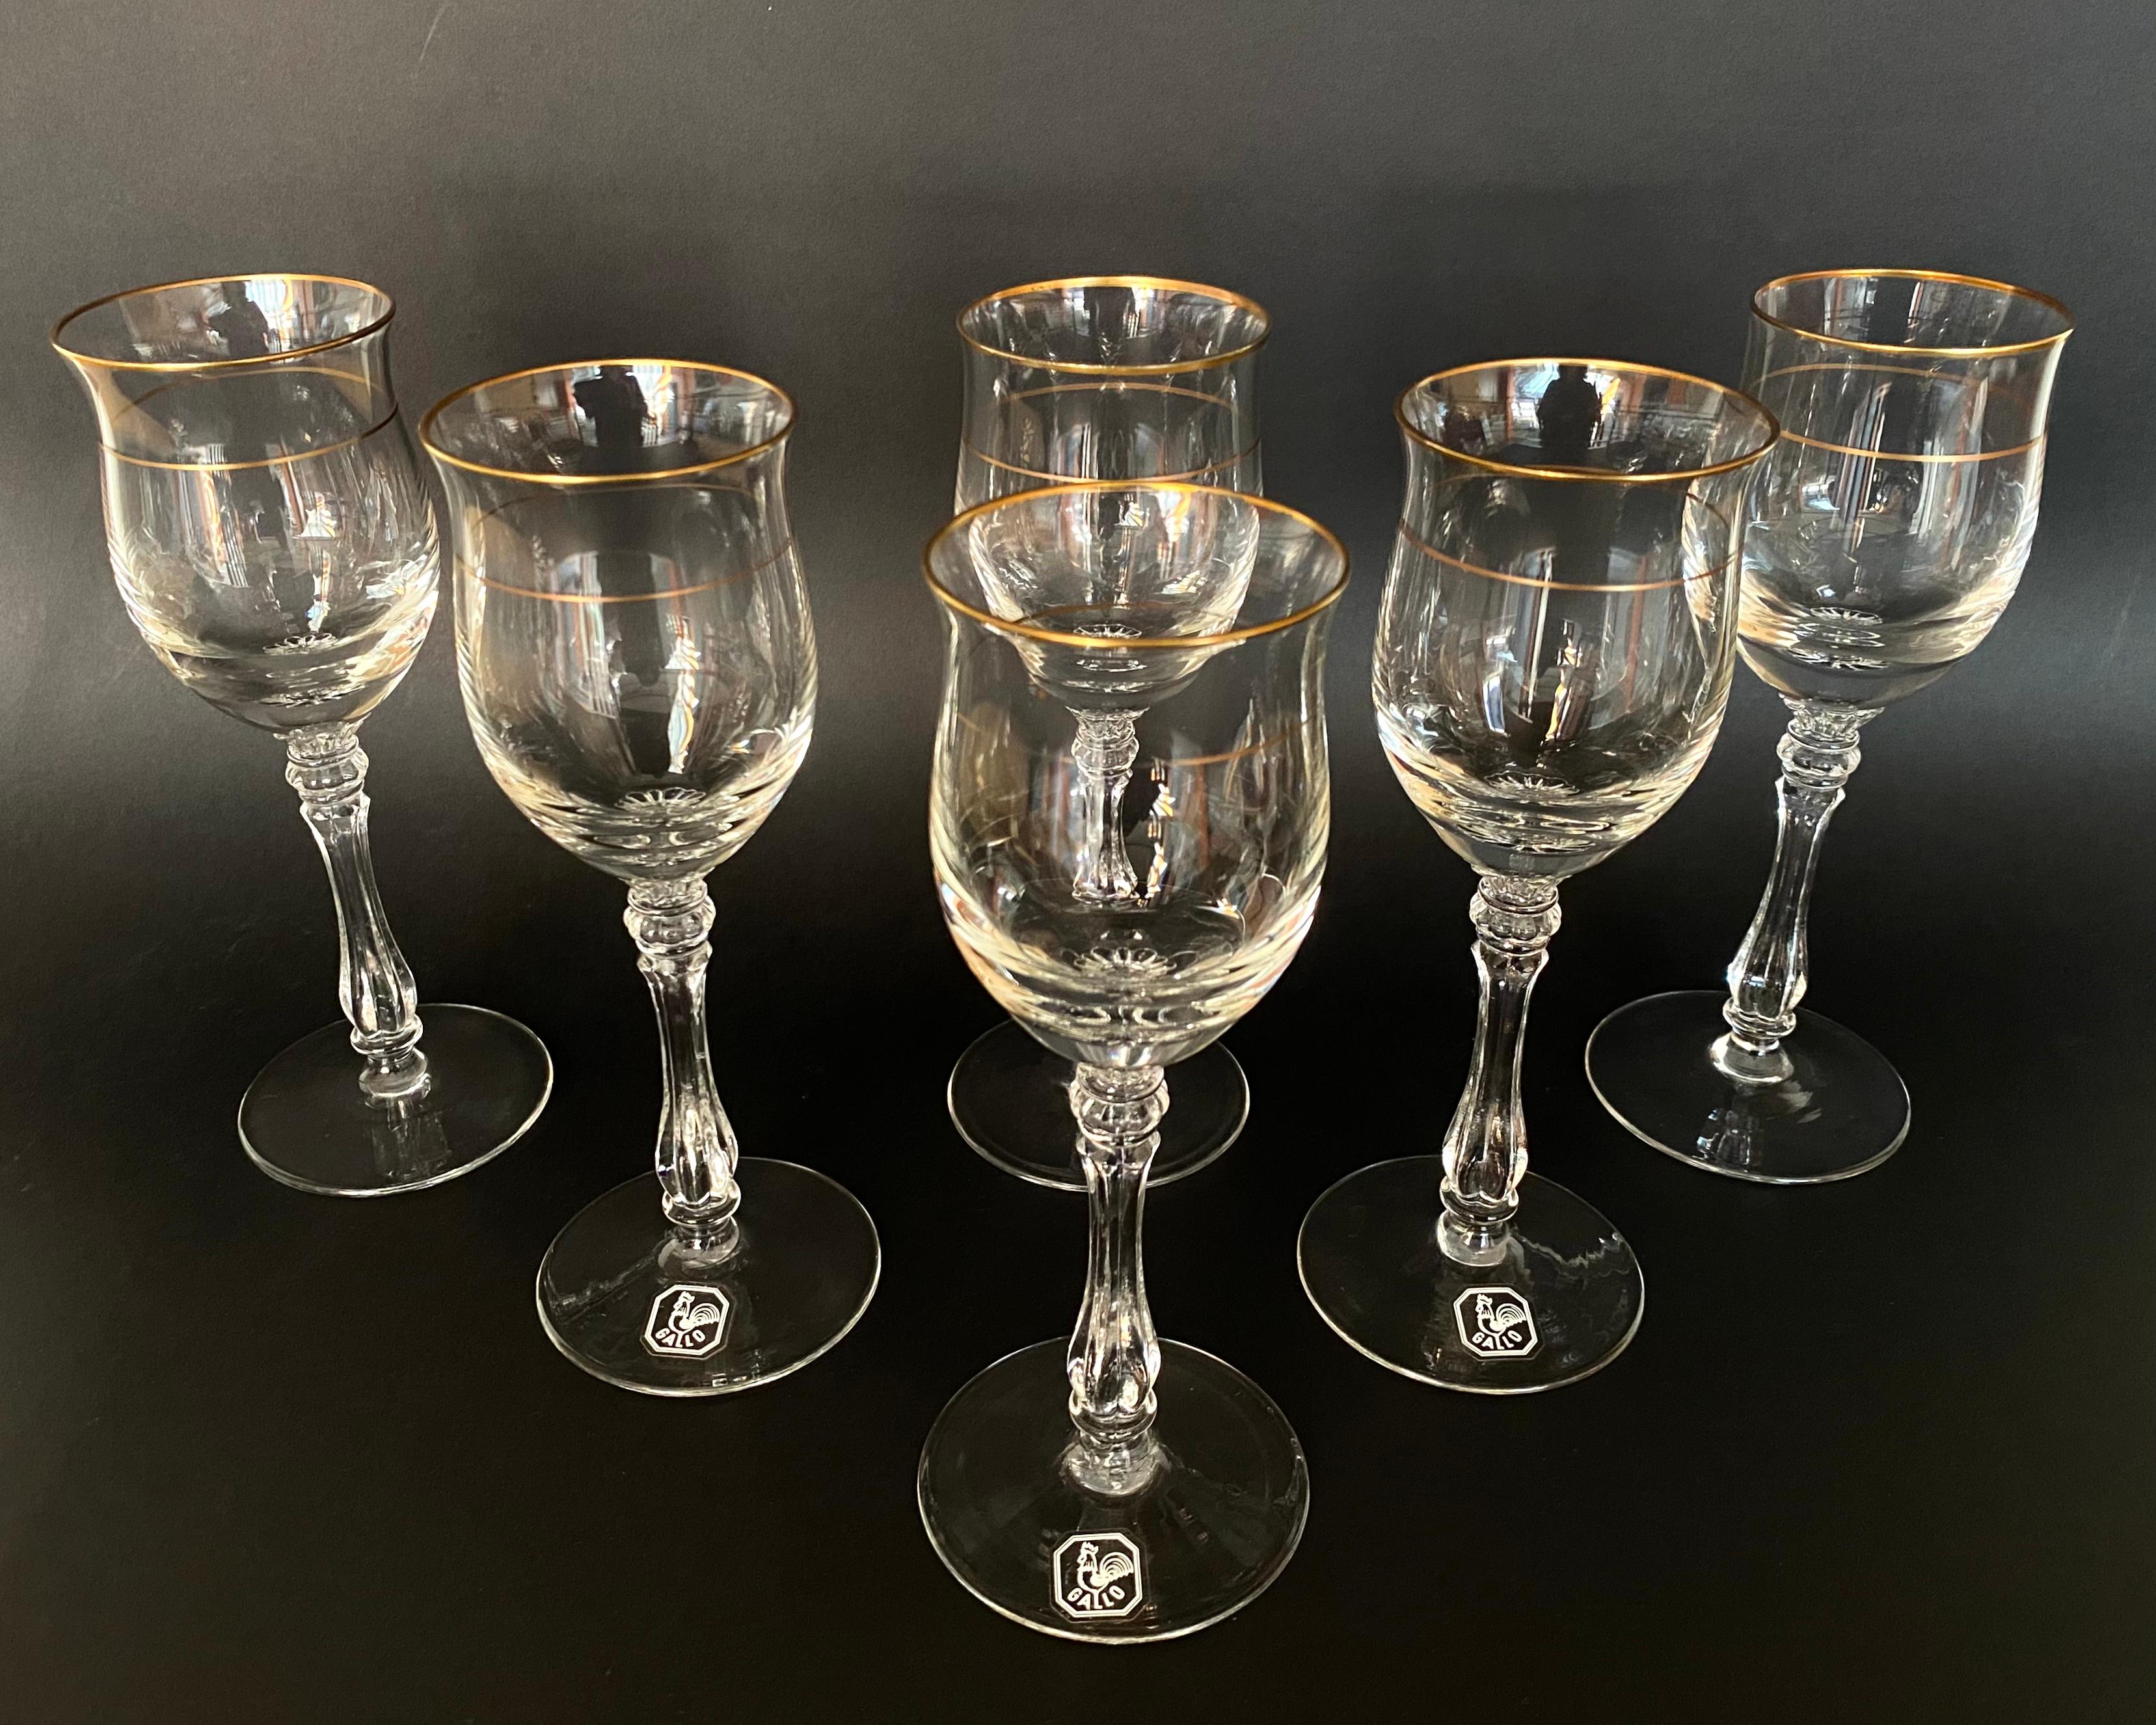 Late 20th Century Charming Vintage Set of 6 Crystal Cognac Glasses by Gallo, Germany, 1970s For Sale